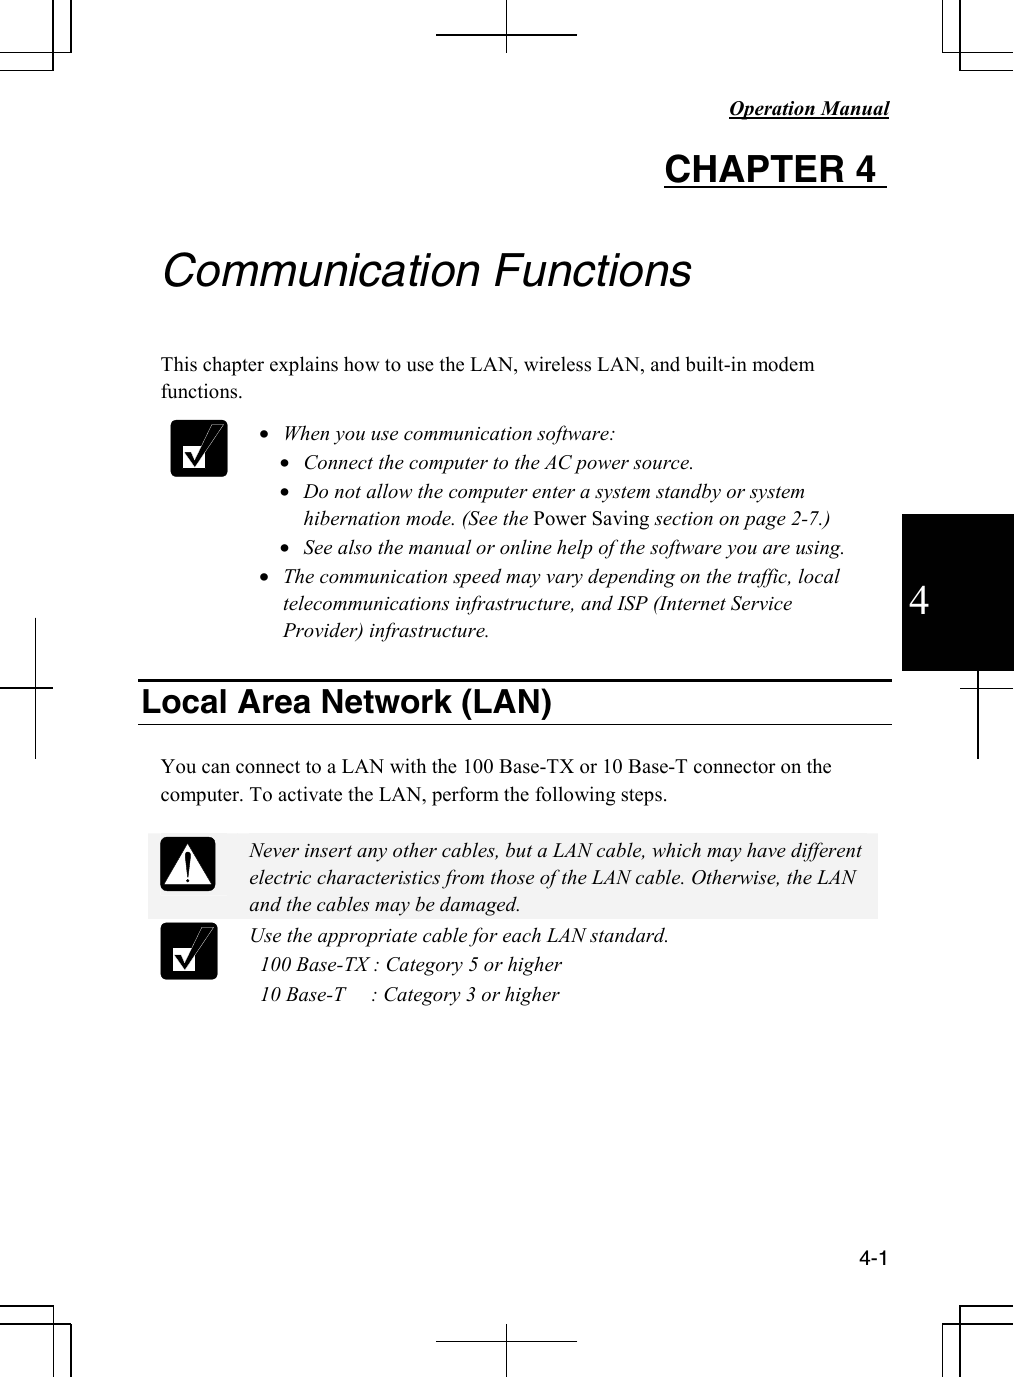   Operation Manual          4-1 4 CHAPTER 4    Communication Functions  This chapter explains how to use the LAN, wireless LAN, and built-in modem functions.   • When you use communication software: • Connect the computer to the AC power source. • Do not allow the computer enter a system standby or system hibernation mode. (See the Power Saving section on page 2-7.) • See also the manual or online help of the software you are using. • The communication speed may vary depending on the traffic, local telecommunications infrastructure, and ISP (Internet Service Provider) infrastructure.  Local Area Network (LAN)  You can connect to a LAN with the 100 Base-TX or 10 Base-T connector on the computer. To activate the LAN, perform the following steps.   Never insert any other cables, but a LAN cable, which may have different electric characteristics from those of the LAN cable. Otherwise, the LAN and the cables may be damaged.  Use the appropriate cable for each LAN standard.   100 Base-TX : Category 5 or higher   10 Base-T     : Category 3 or higher          